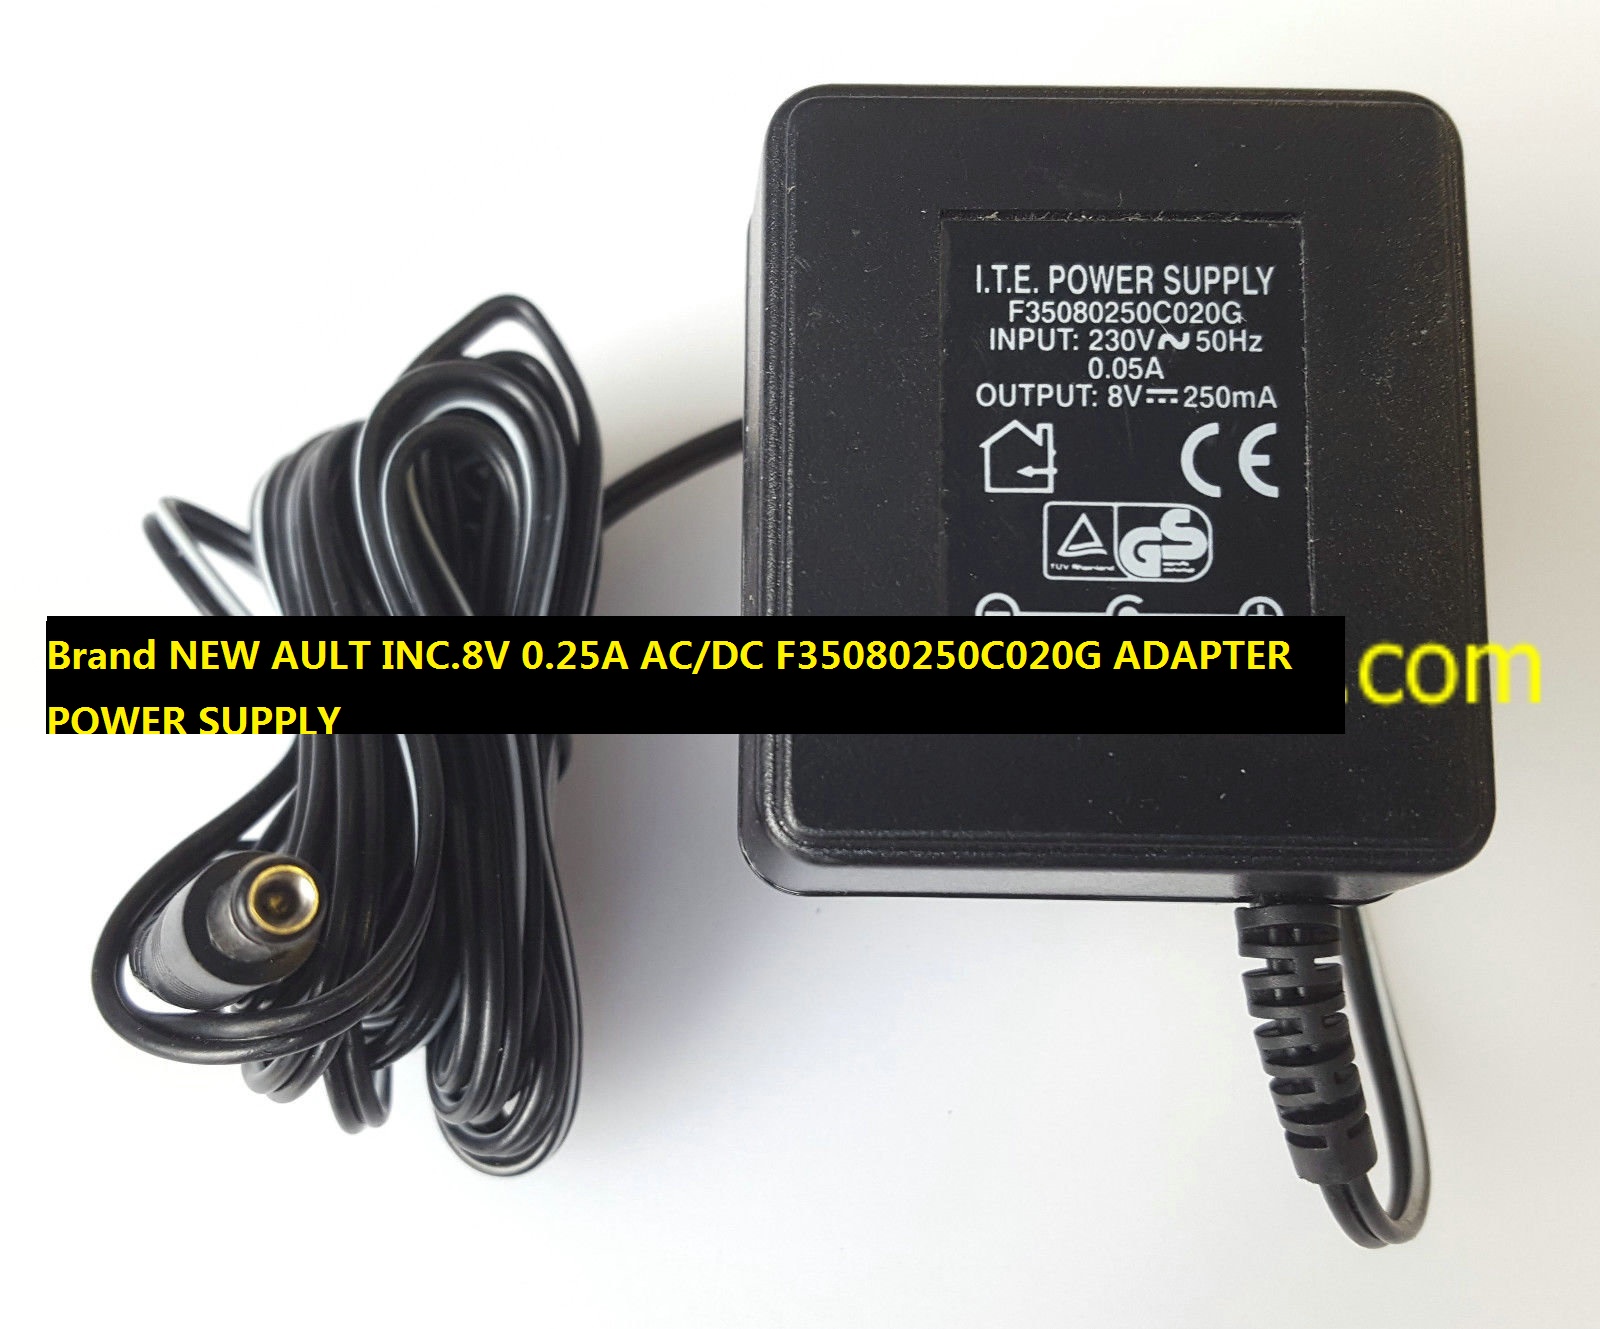 *100% Brand NEW* POWER SUPPLY AULT INC.8V 0.25A AC/DC F35080250C020G ADAPTER